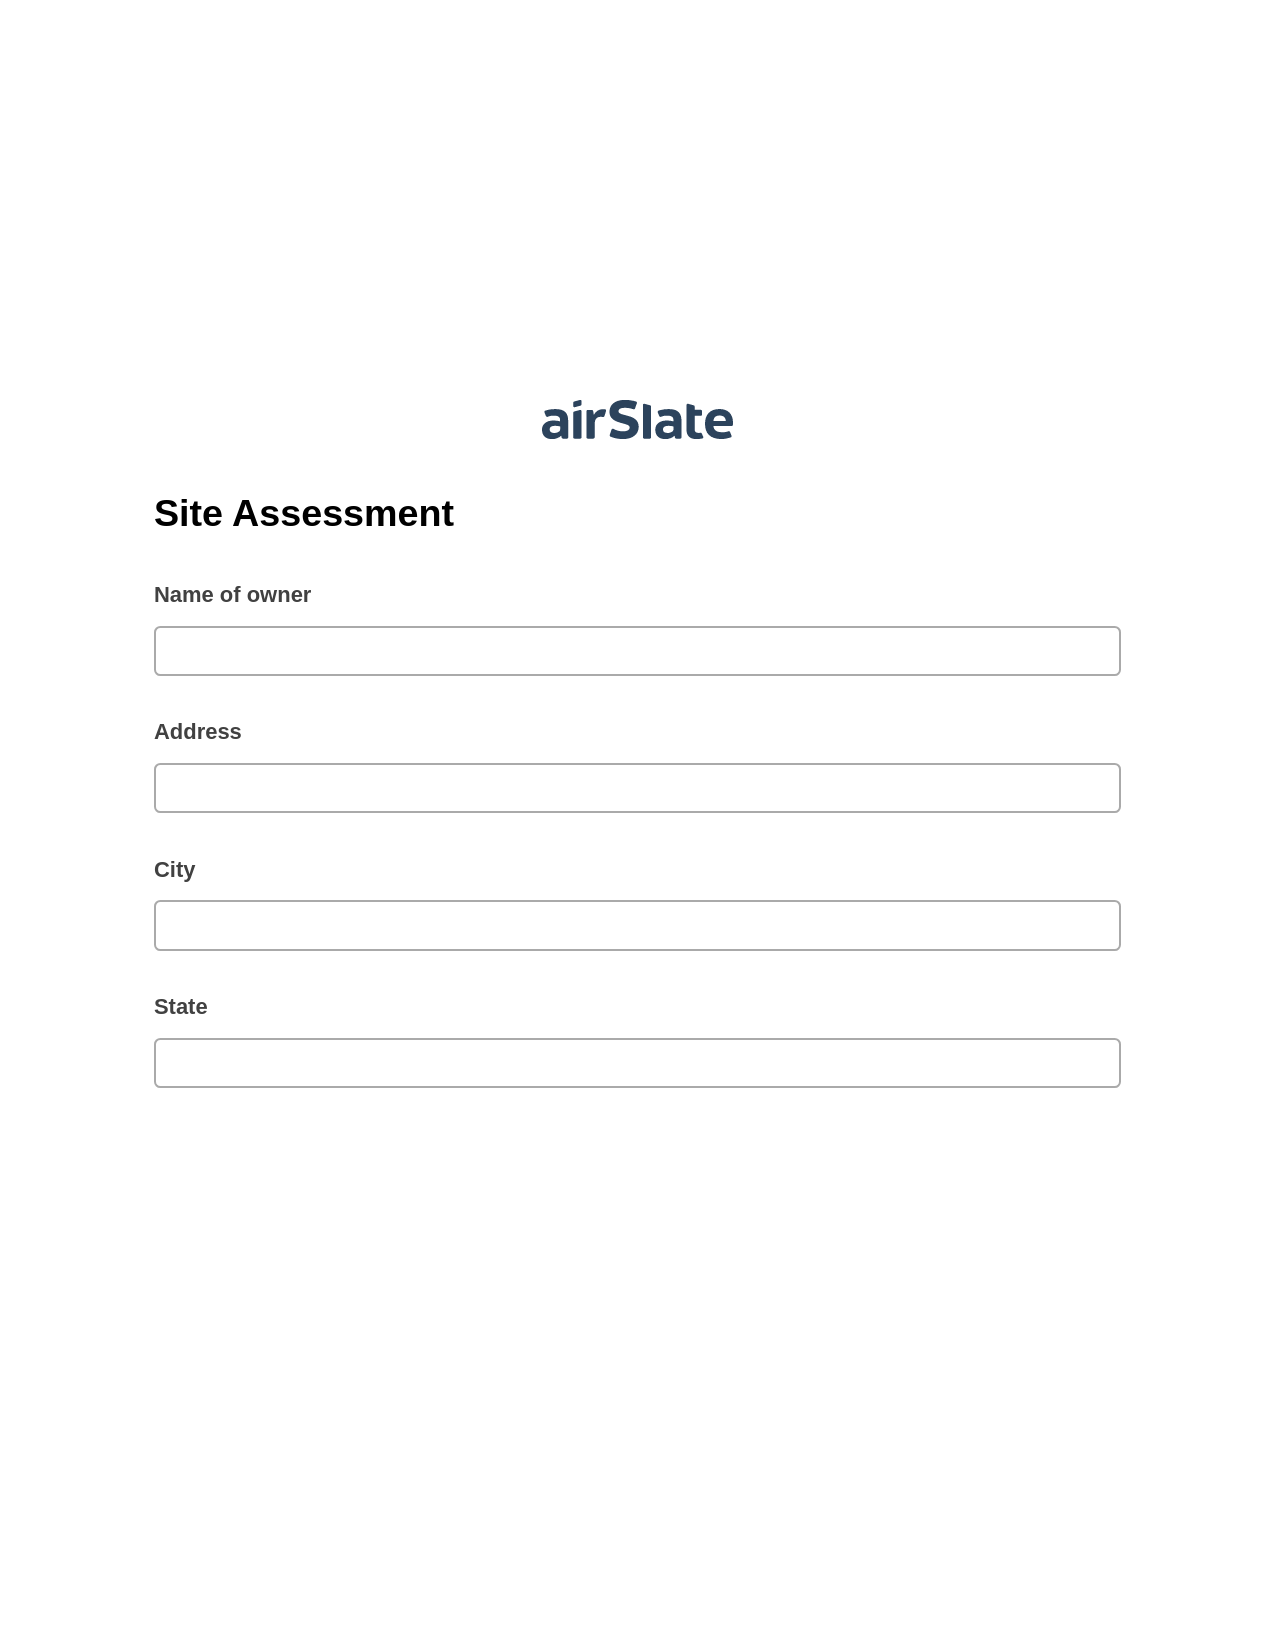 Site Assessment Pre-fill Document Bot, Mailchimp send Campaign bot, Export to Salesforce Bot